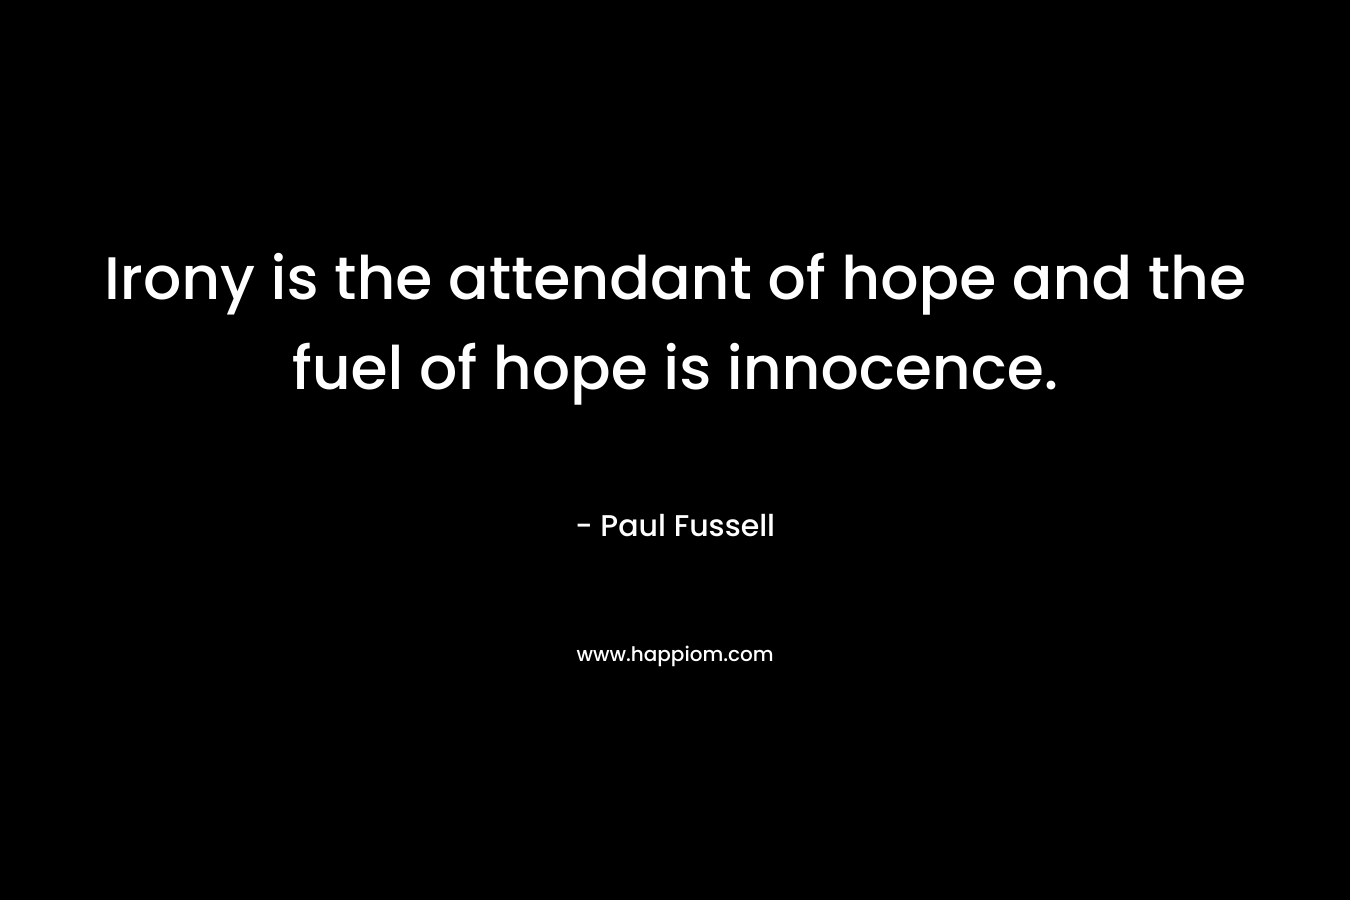 Irony is the attendant of hope and the fuel of hope is innocence. – Paul Fussell